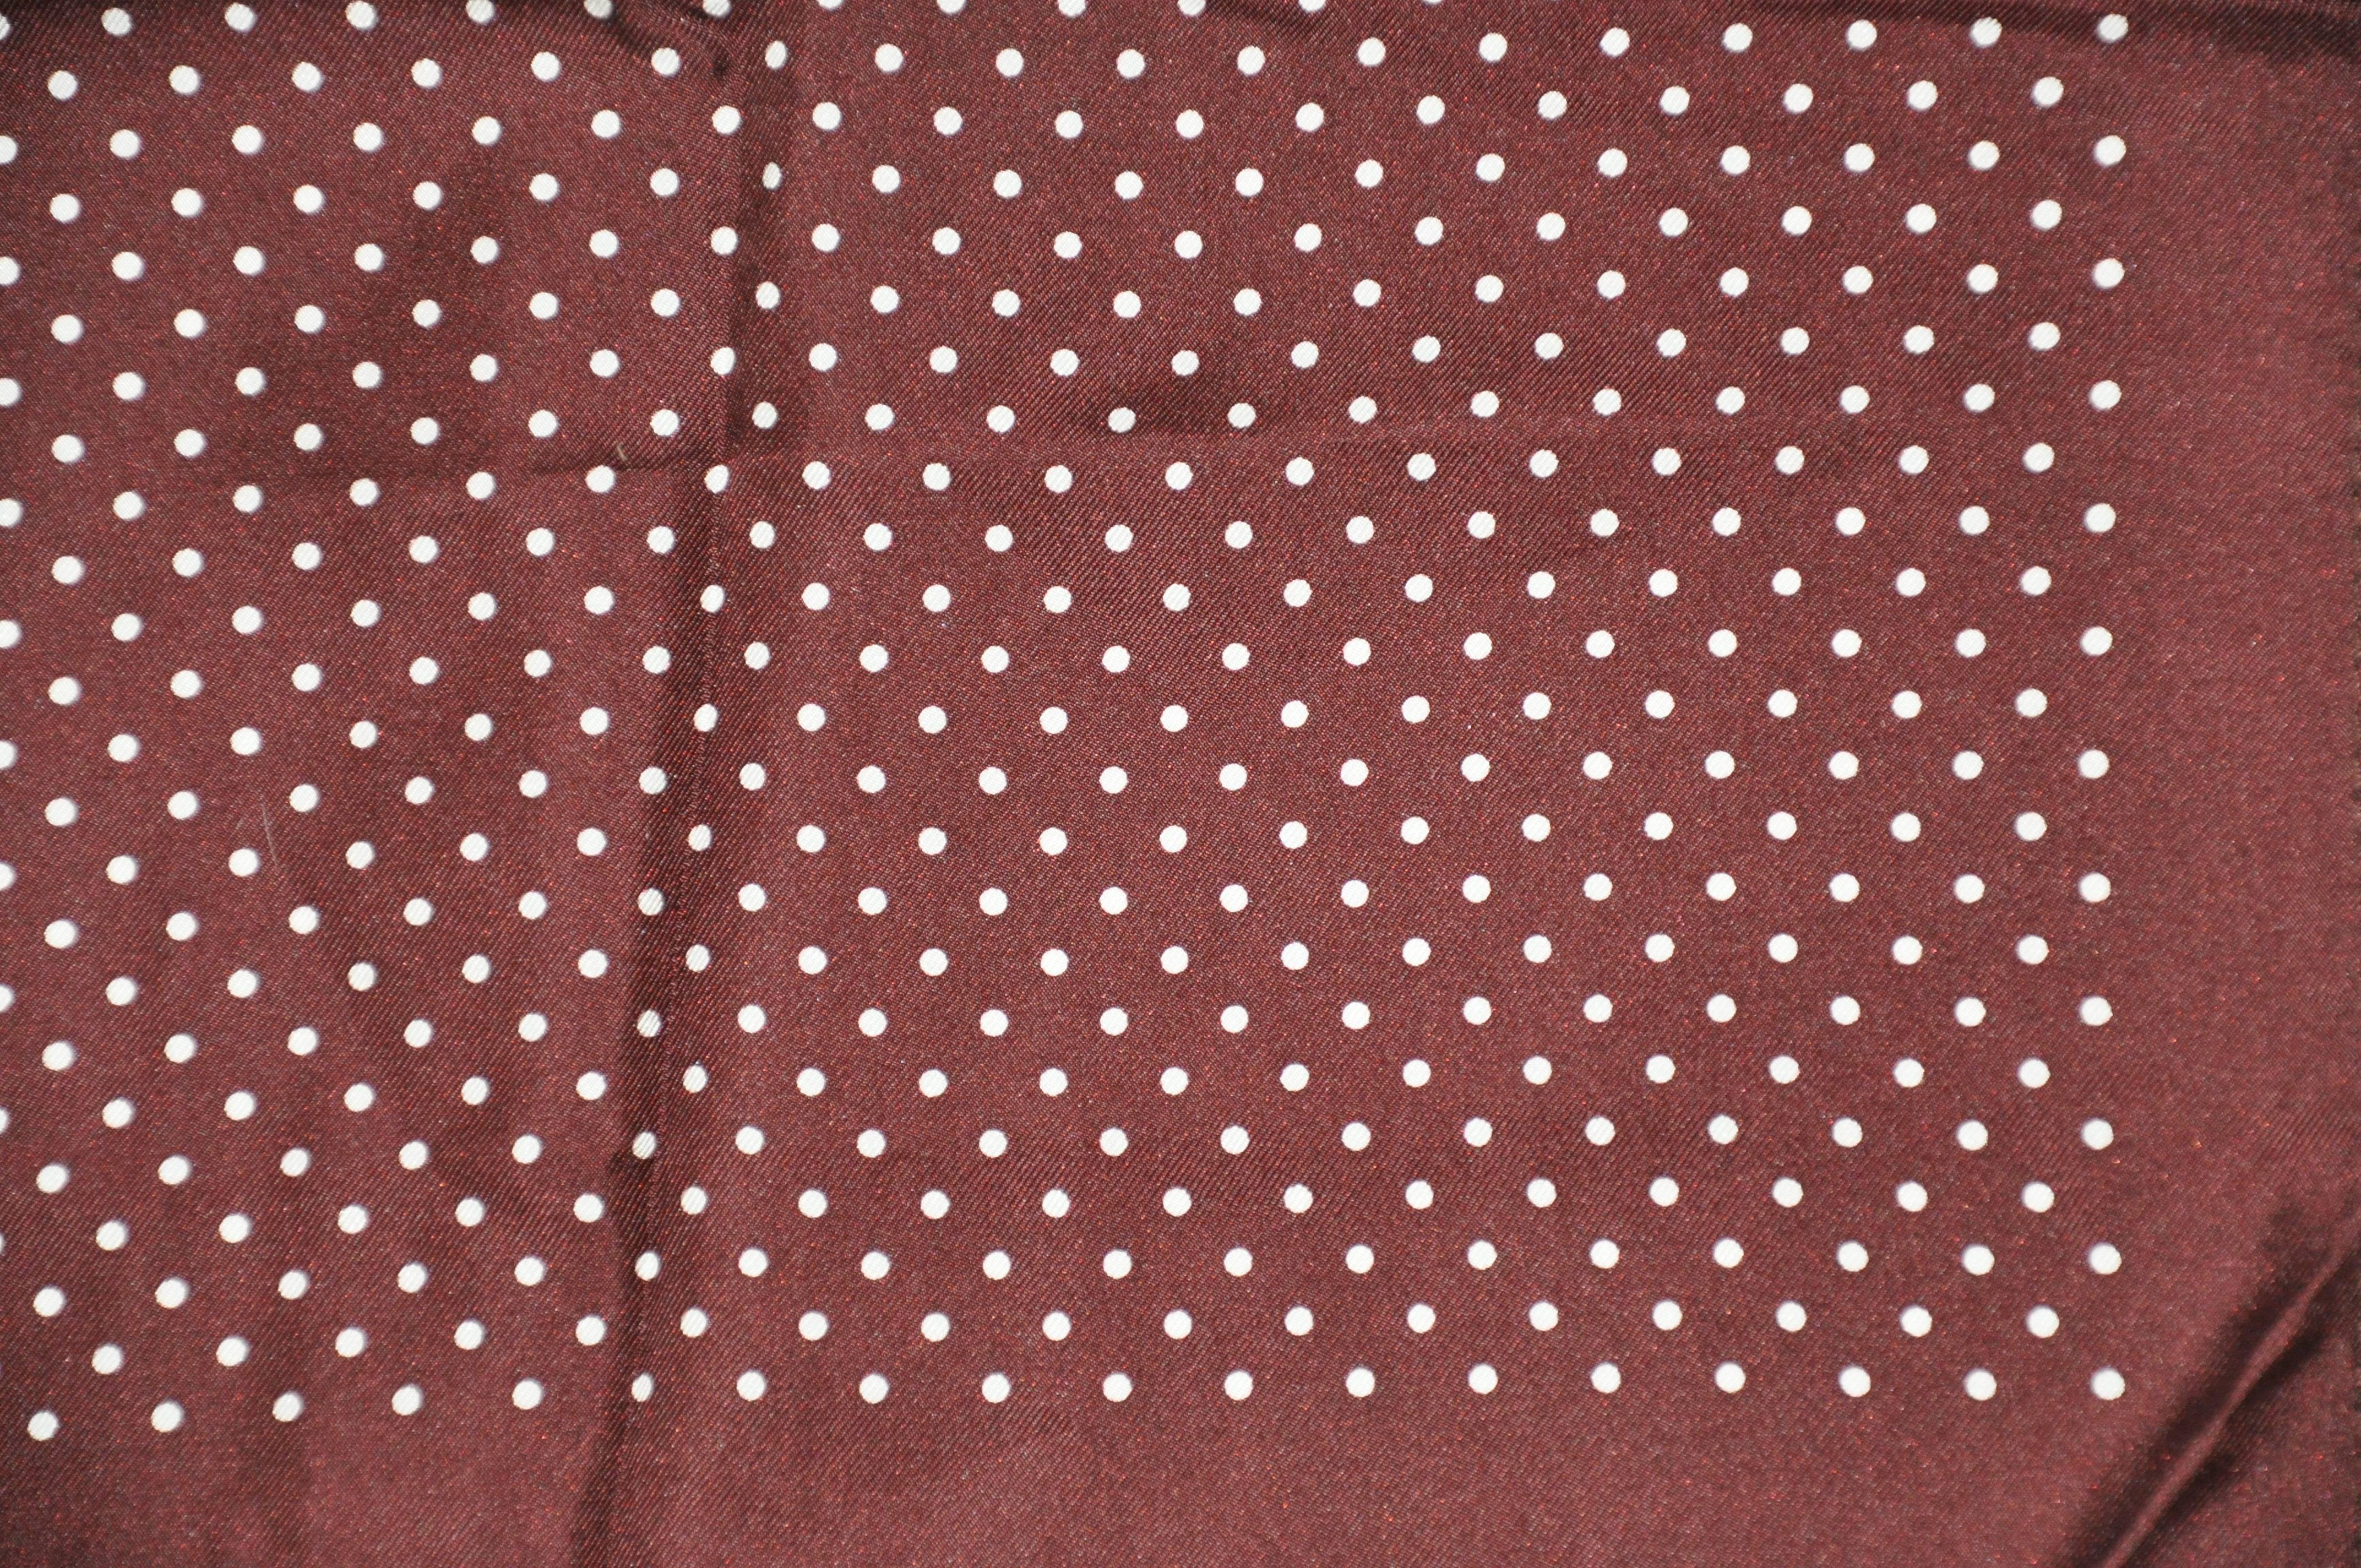        Classic brick burgundy surrounding a polka dot center silk handkerchief is accented with hand-rolled edges and measures 14 inches by 14 inches. Made in Italy.